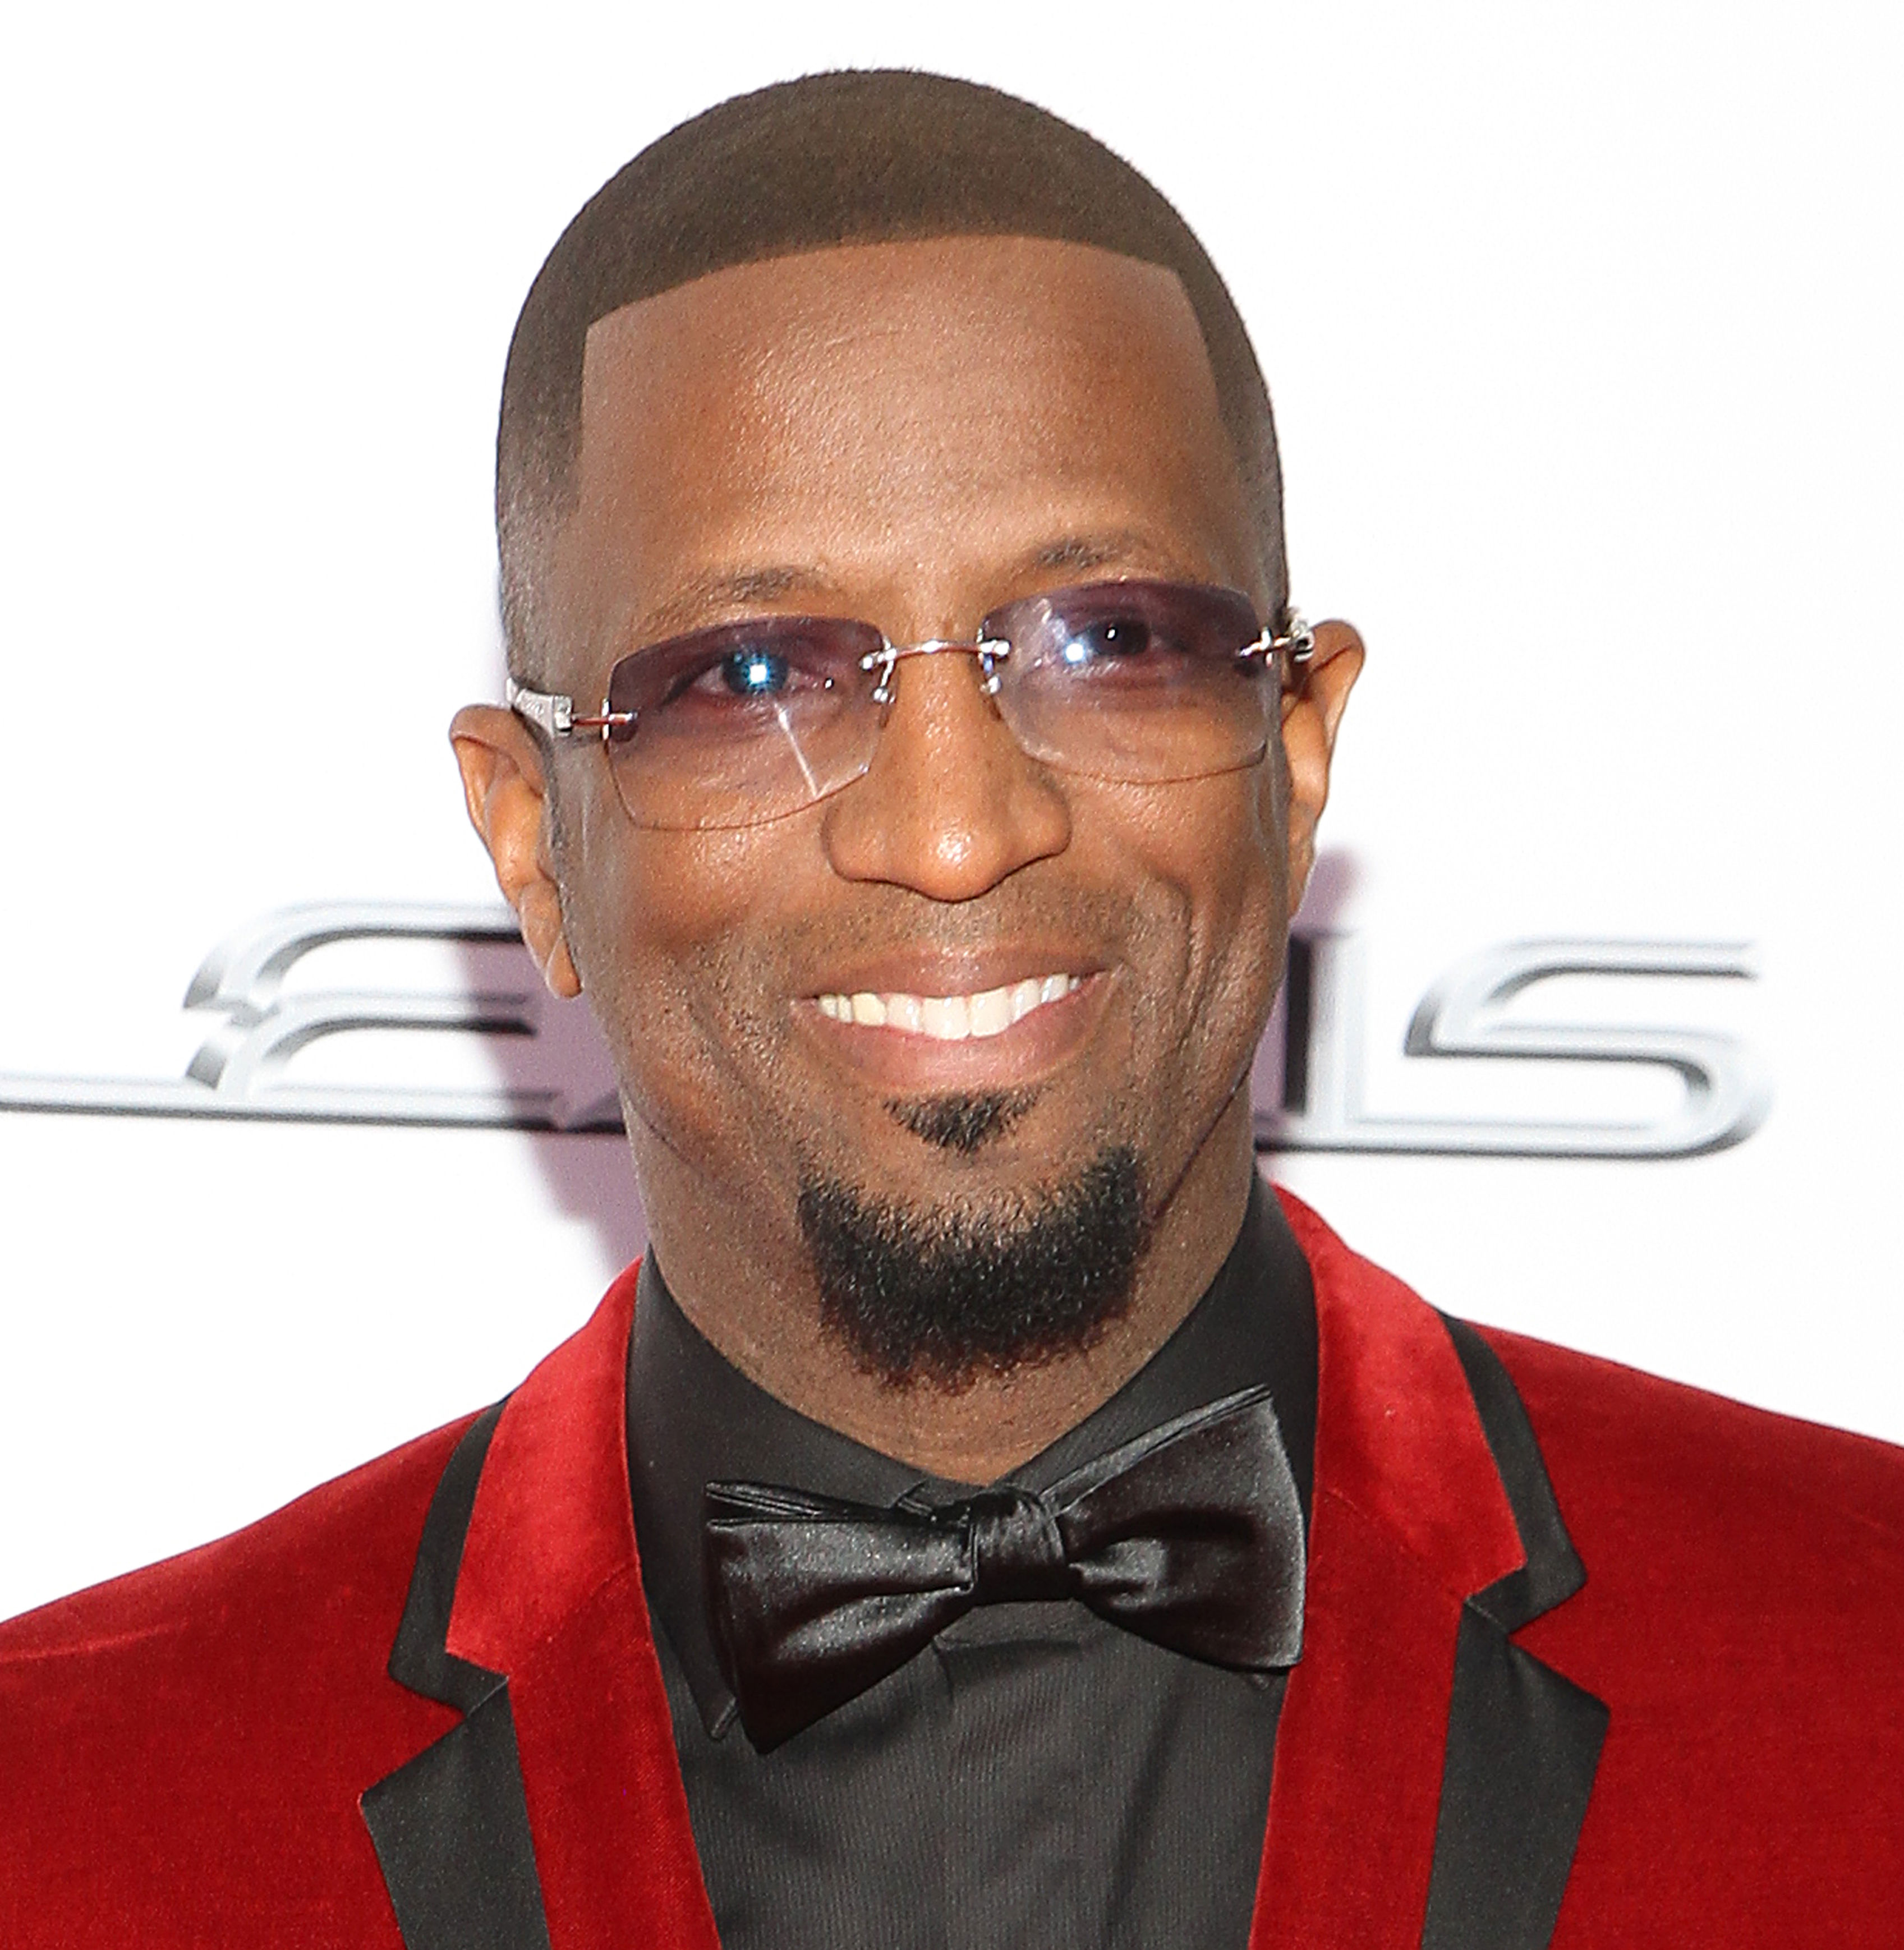 <p><span>On Jan. 29, 2023, comedian Rickey Smiley revealed his eldest child, son Brandon Smiley -- who also worked as a comedian -- had passed away at 32. "I lost my oldest son #BrandonSmiley this morning," Rickey captioned an Instagram </span><a href="https://www.instagram.com/p/CoAnpiwAUuX/?hl=en" rel="noreferrer noopener">video</a><span> announcing the sad news. "I'm okay, but please pray for my son's mother Brenda, his siblings and his daughter Storm."</span></p>